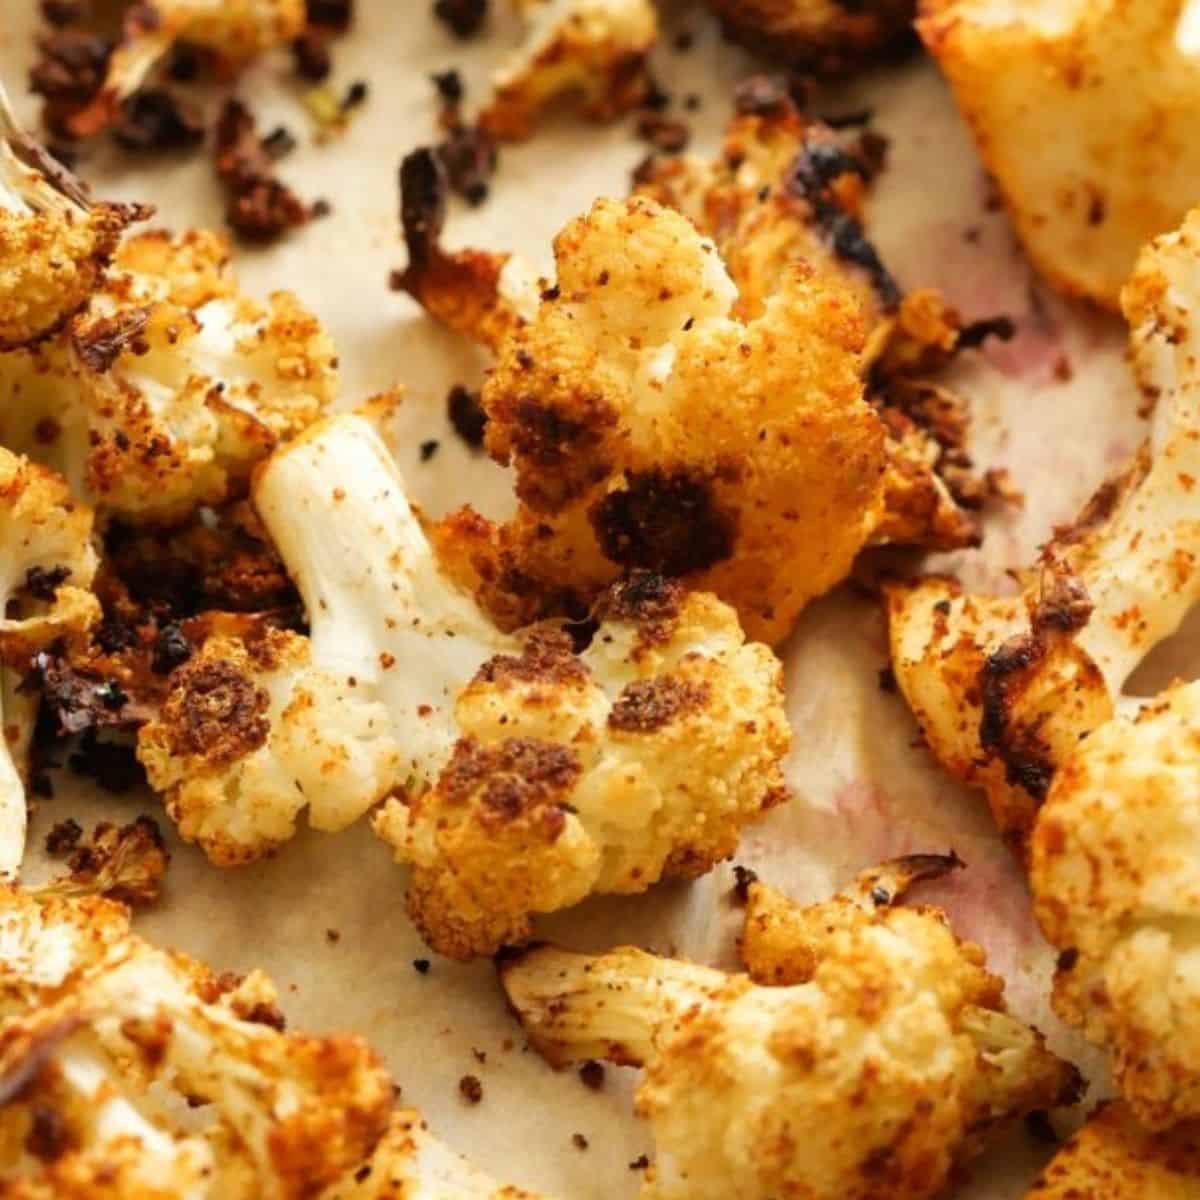 Roasted Cauliflower fresh out of the oven.